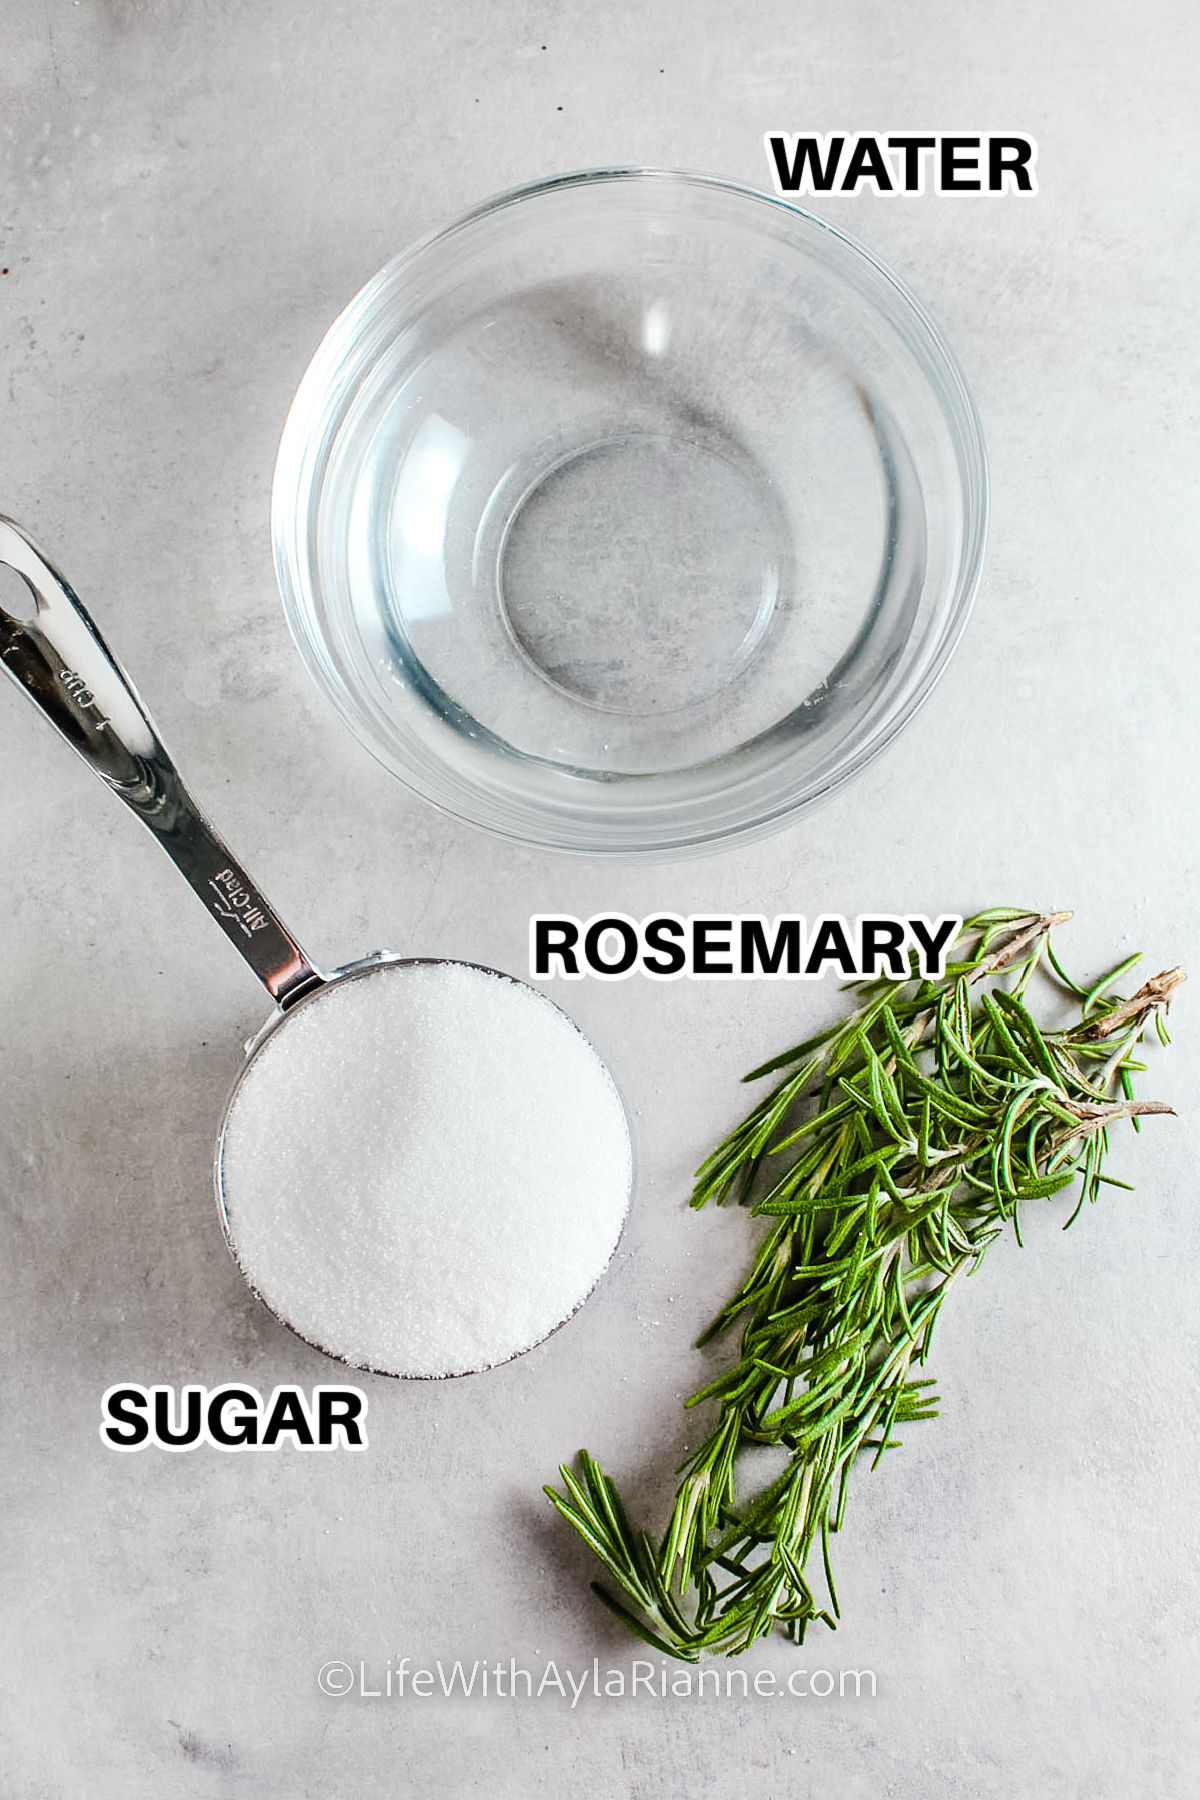 water, sugar , and rosemary with labels to make Rosemary Simple Syrup